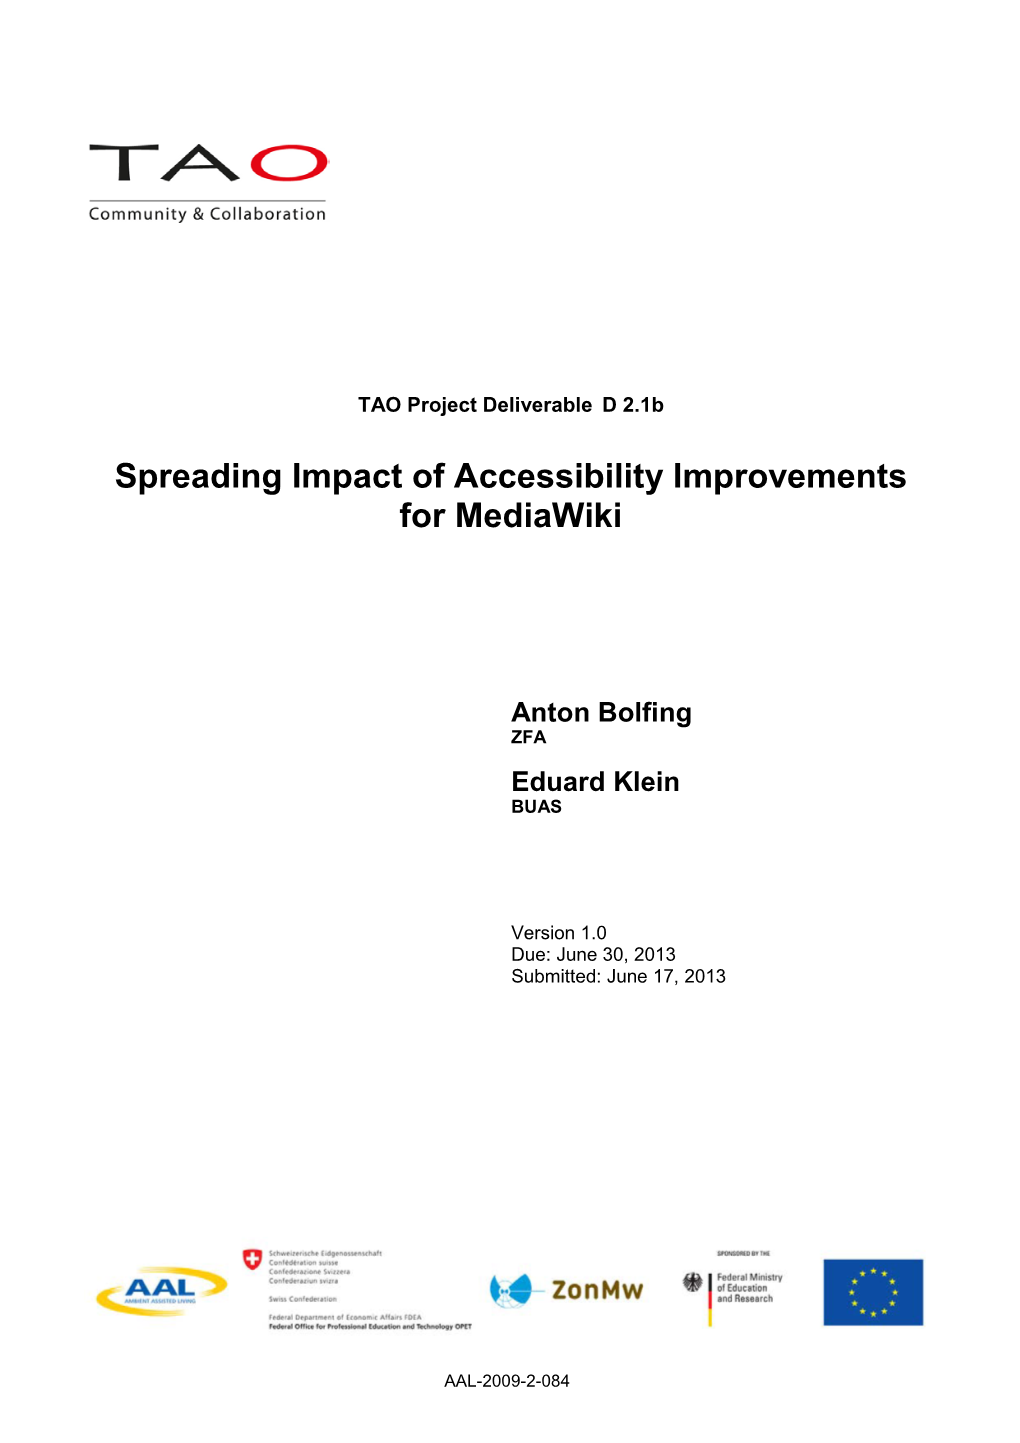 Spreading Impact of Accessibility Improvements for Mediawiki